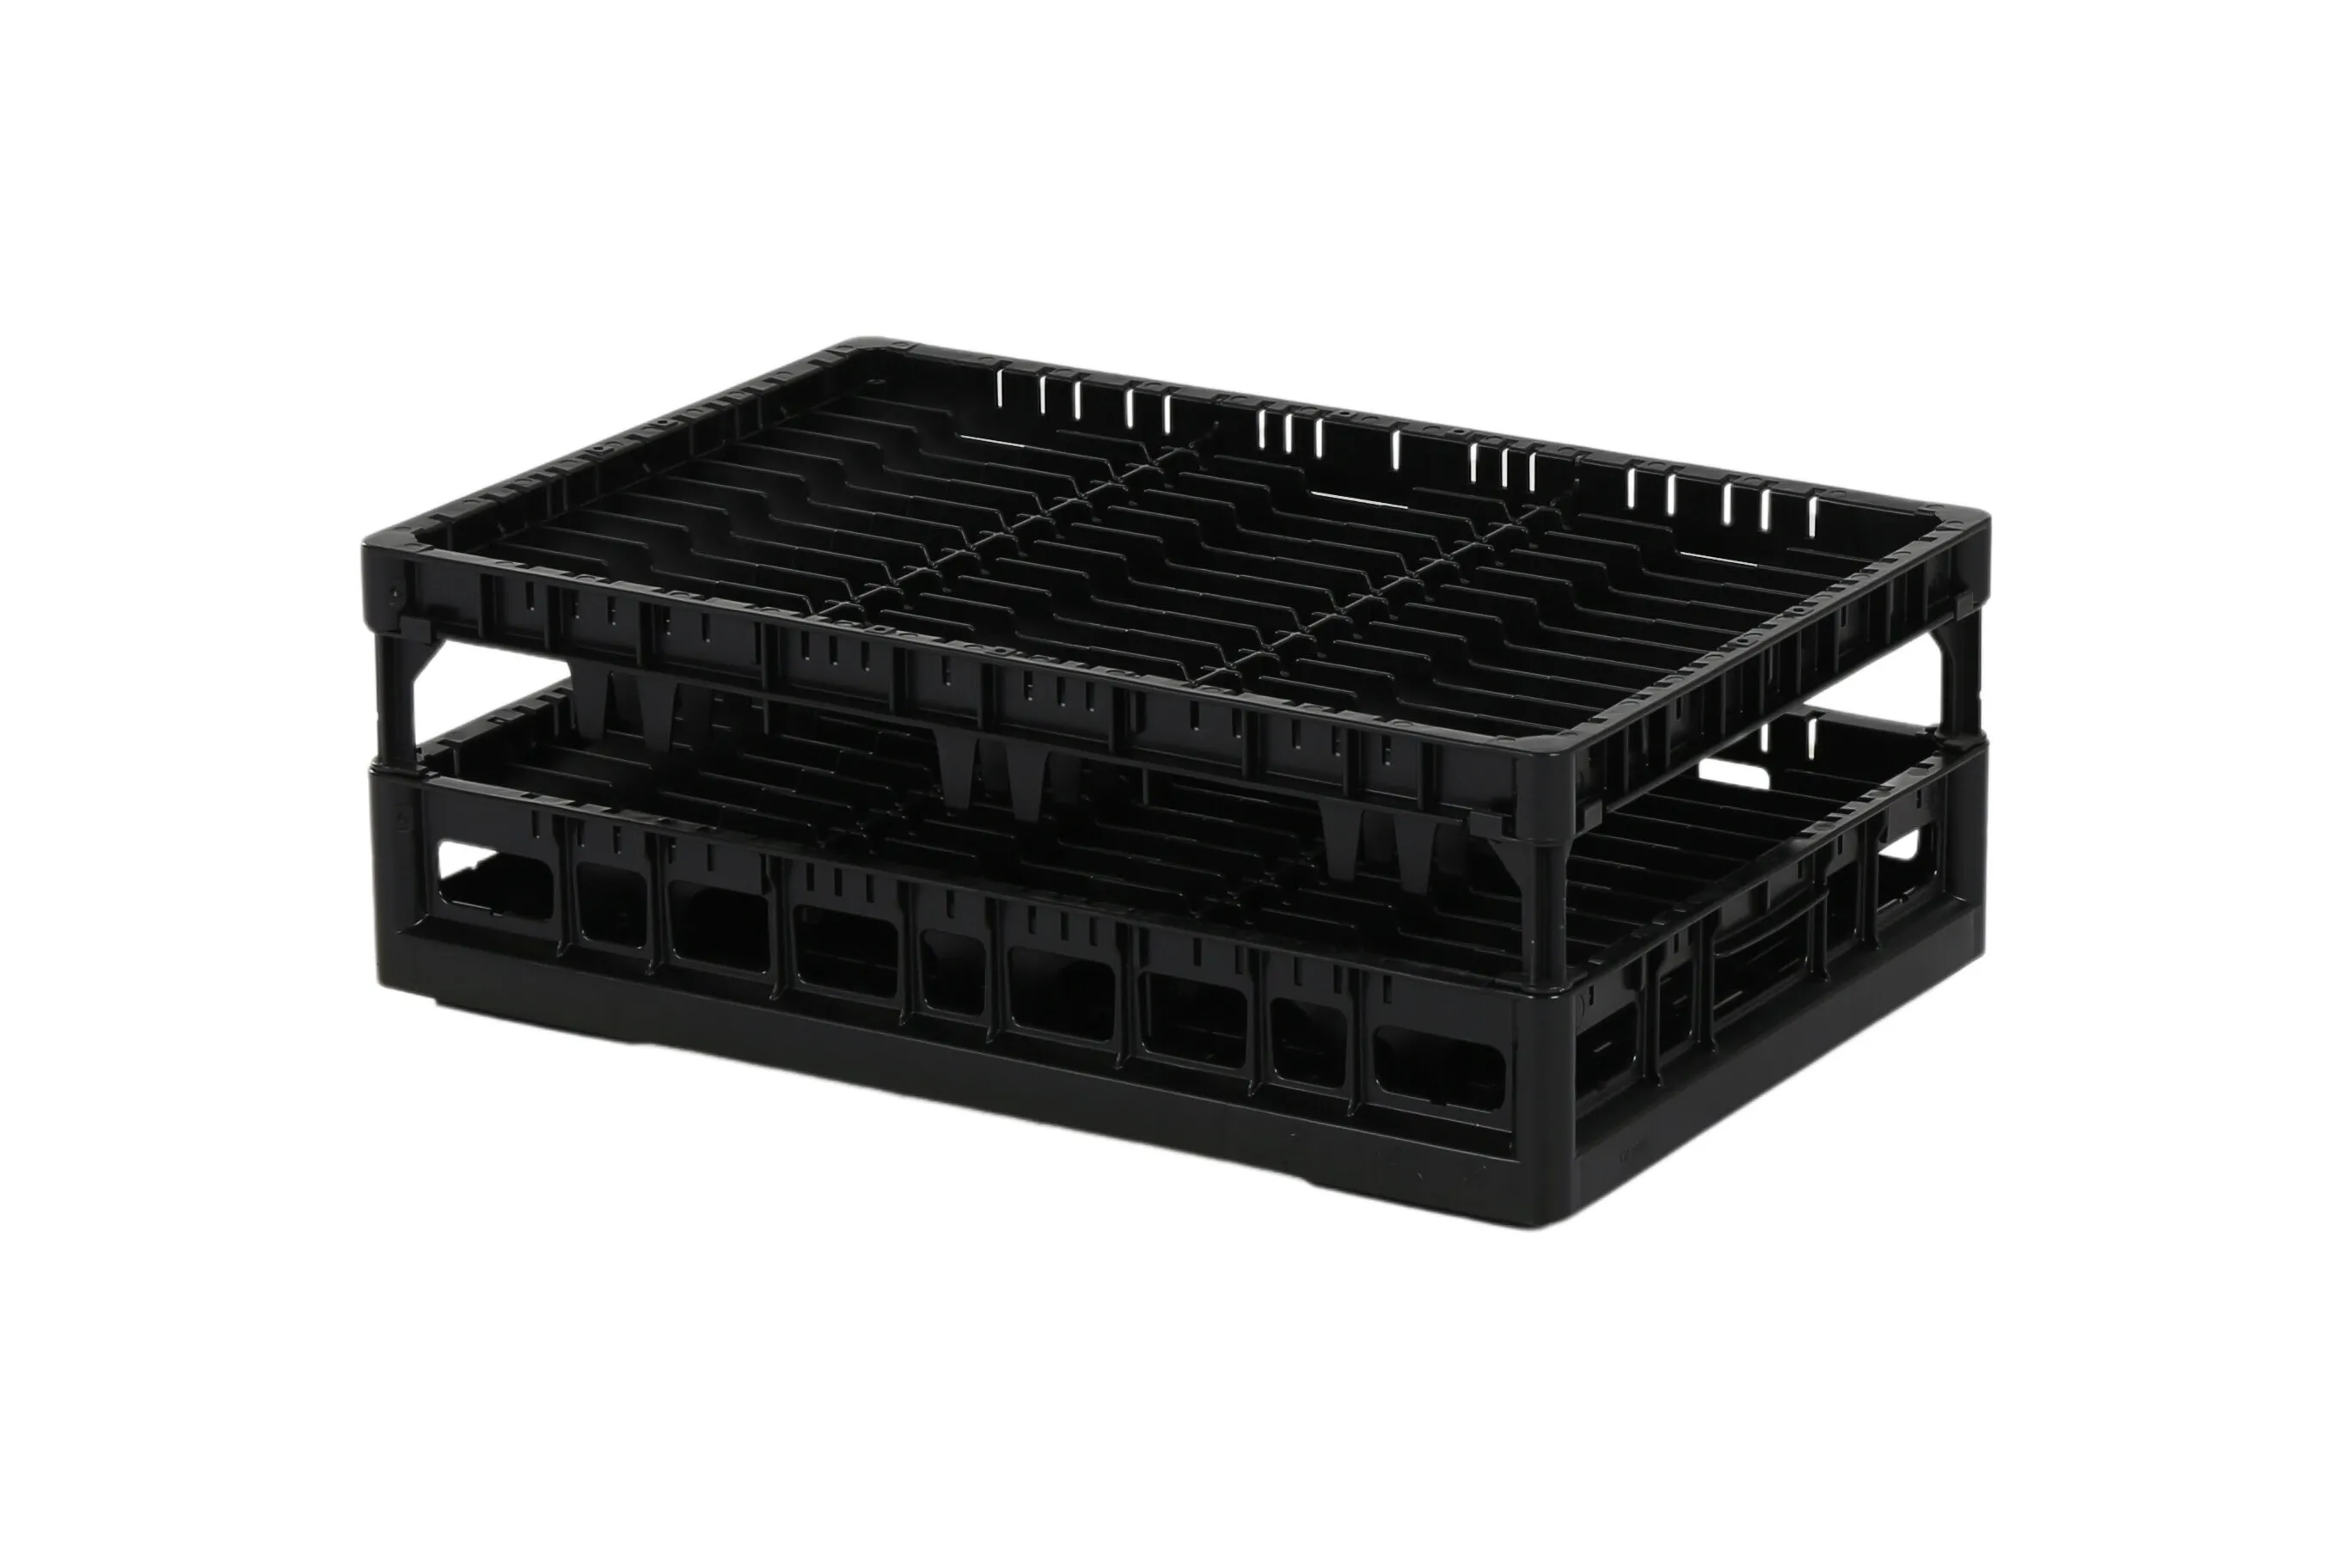 Clixrack Plate basket 600 x 400 mm black - Plate height max. 28mm - with 3 x 12 compartment division - maximum Ø plate 115 mm 